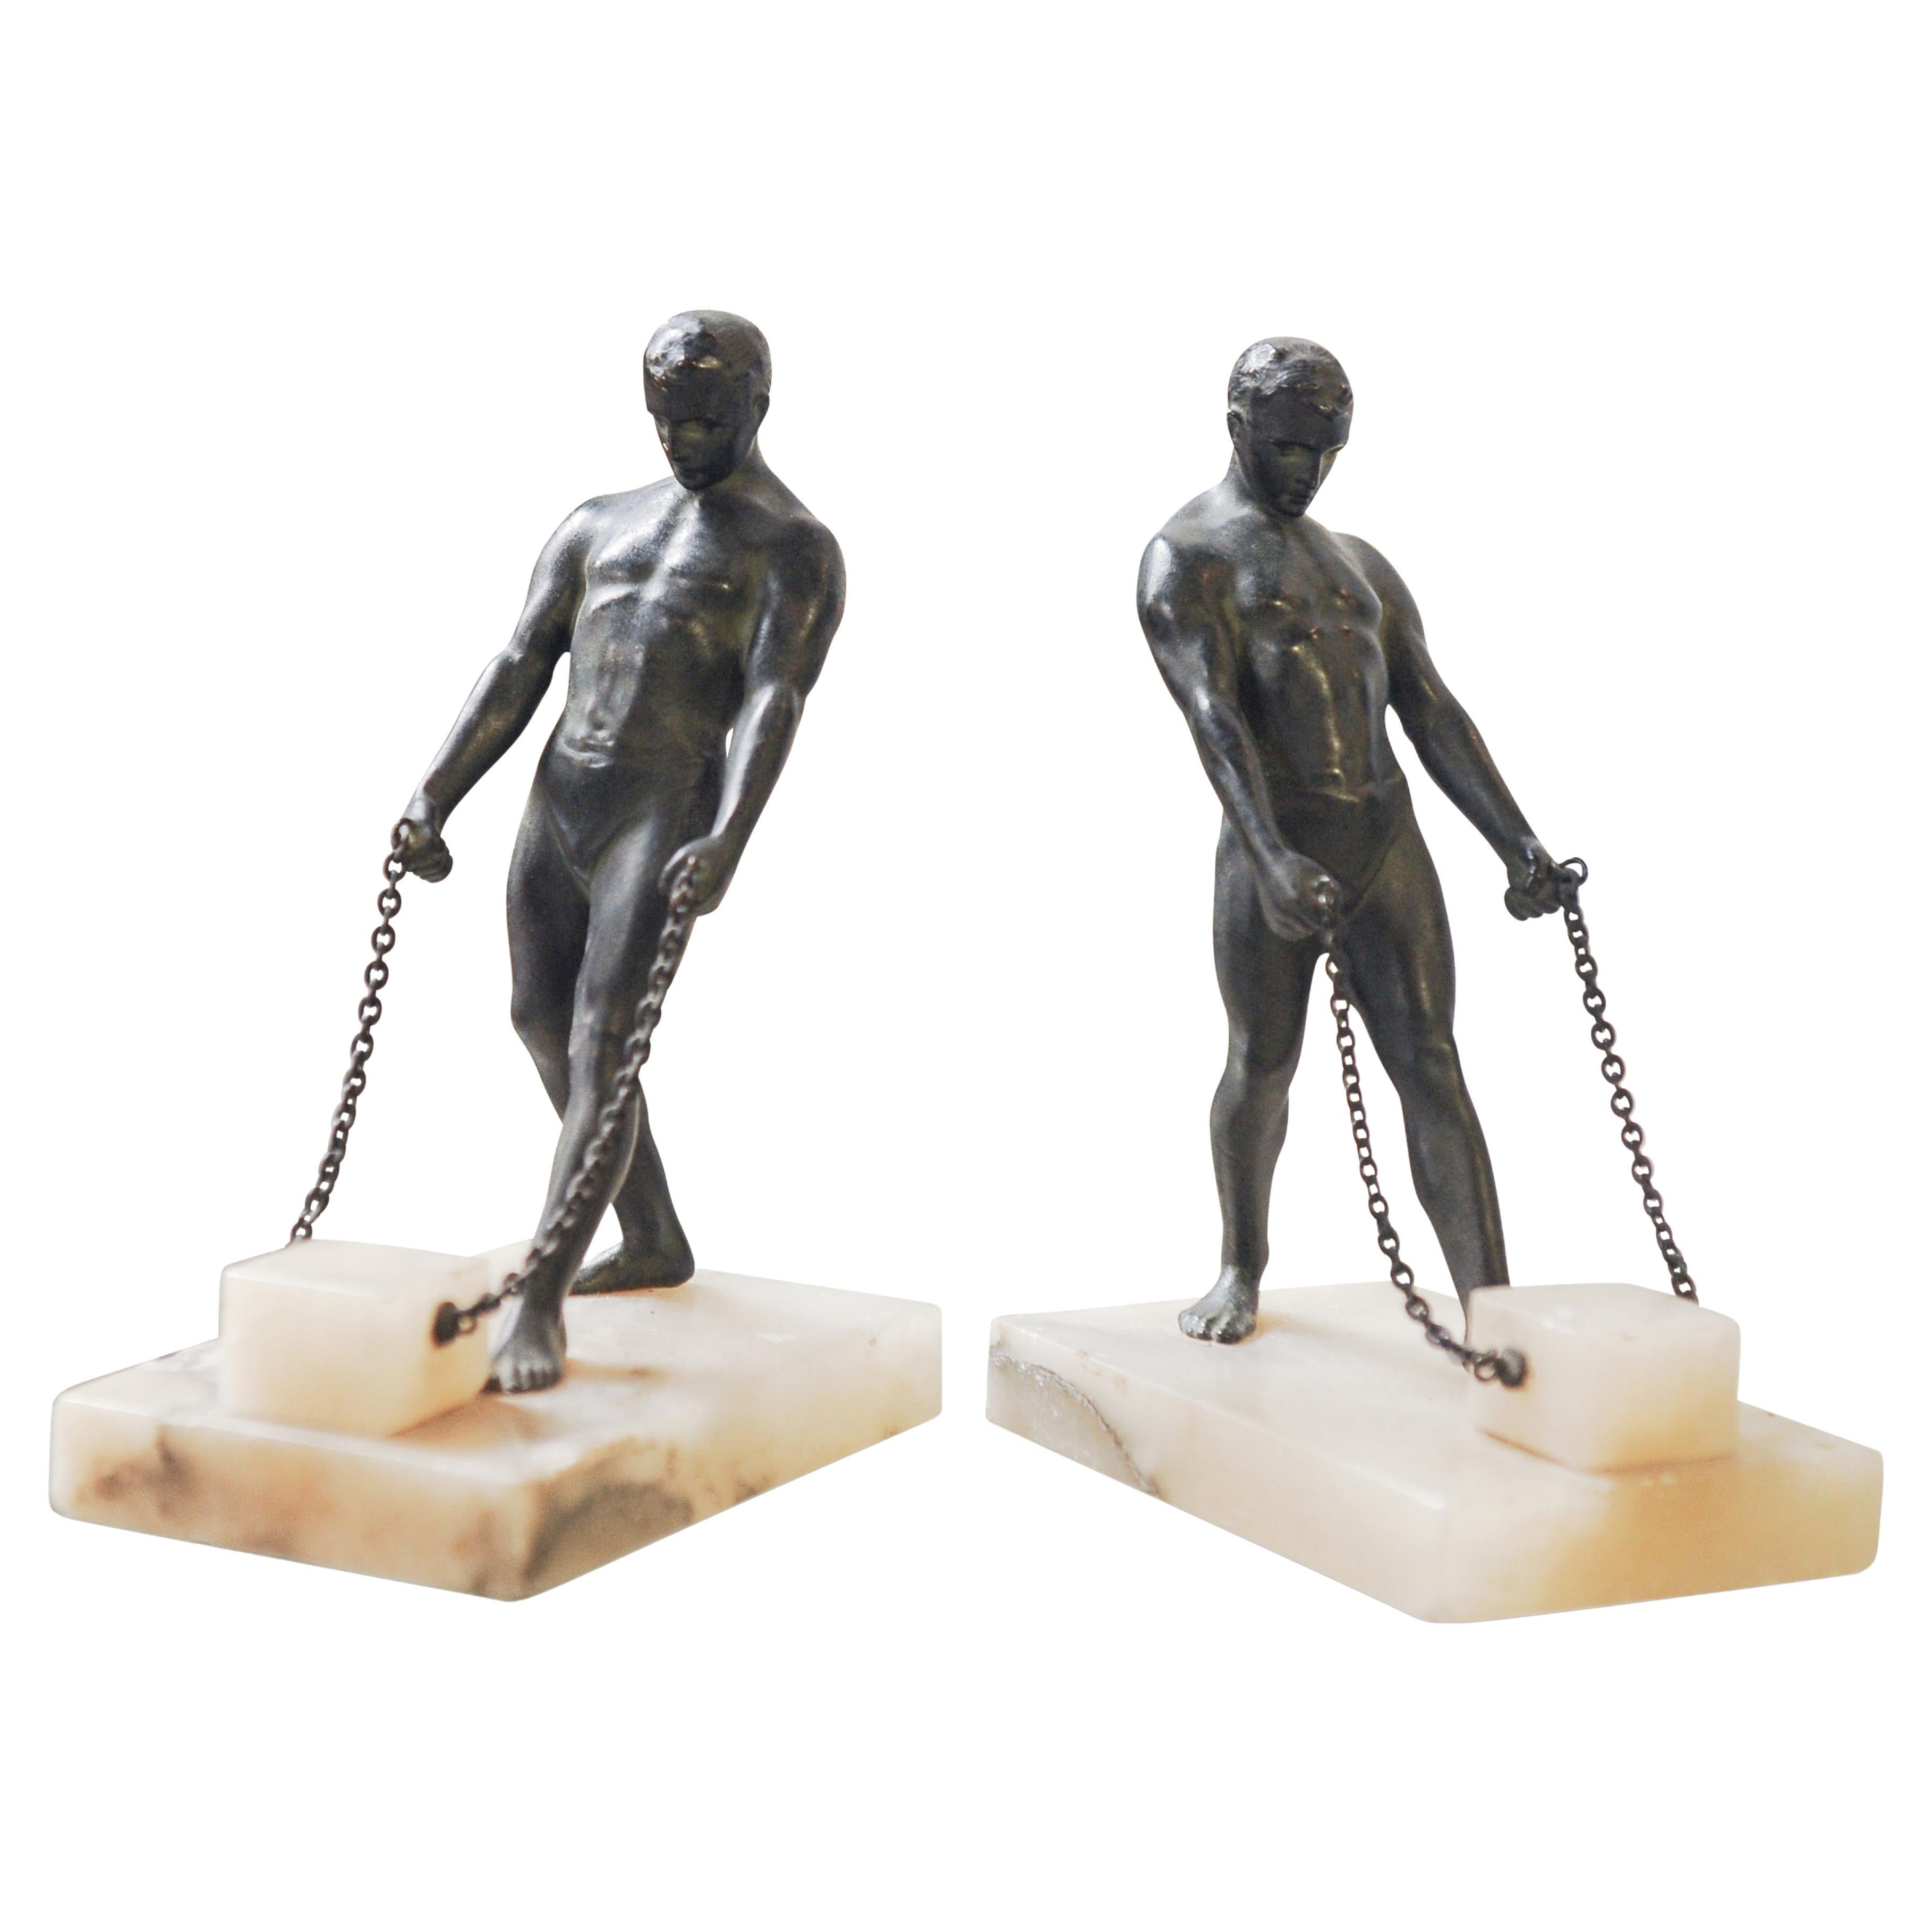  Matching Pair Grand Tour Bronze Greco Male Figurine Bookends On Alabaster Base 